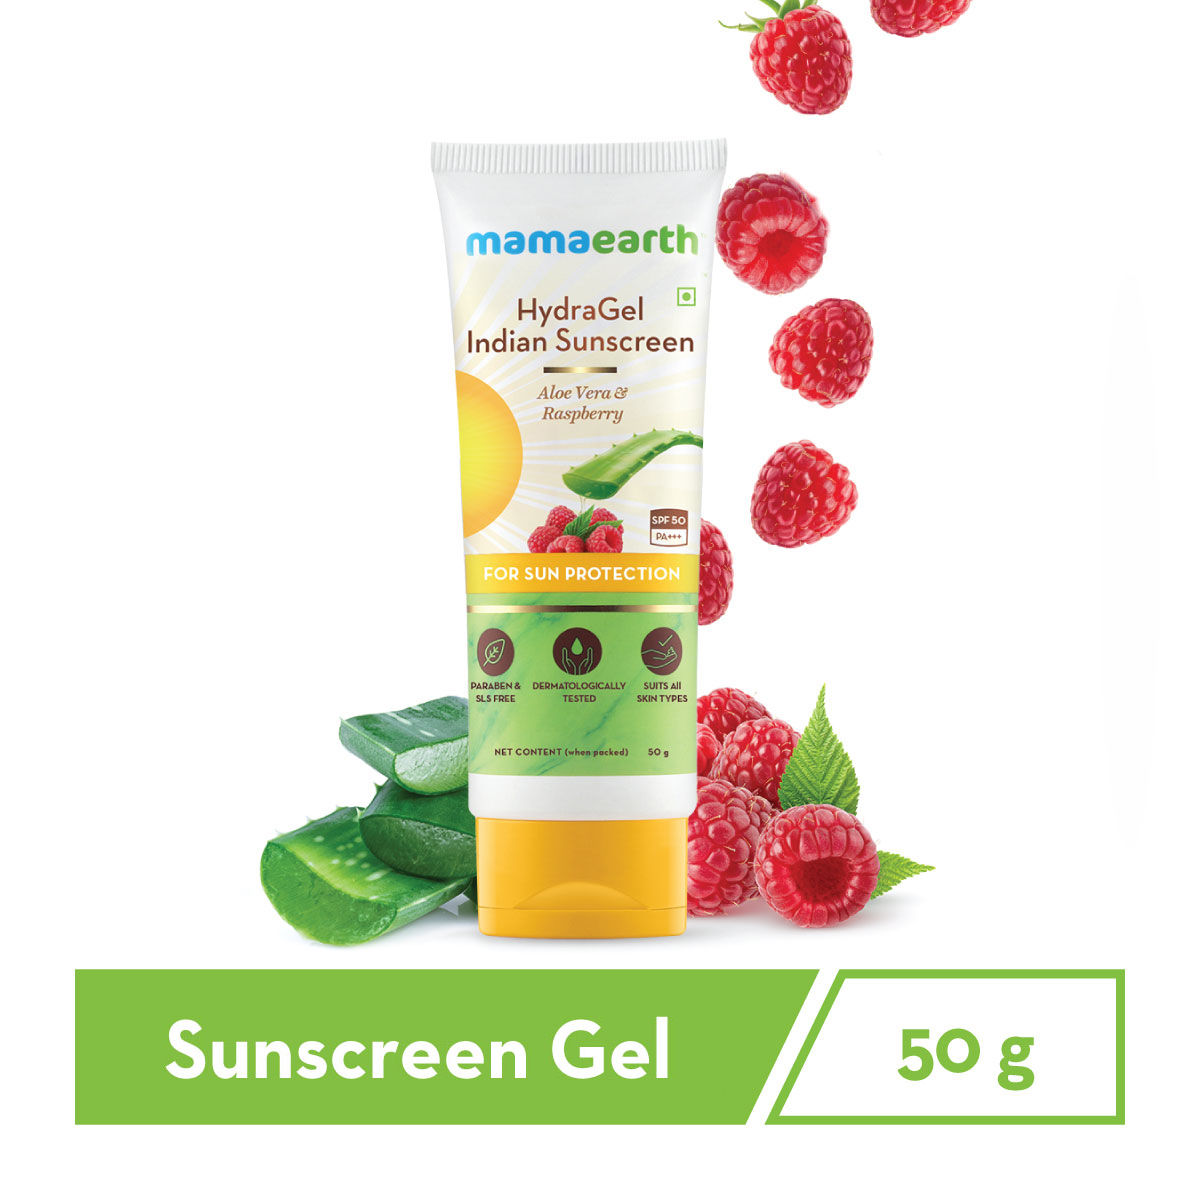 Mamaearth HydraGel Indian Sunscreen SPF 50, with Aloe Vera & Raspberry, for Sun Protection